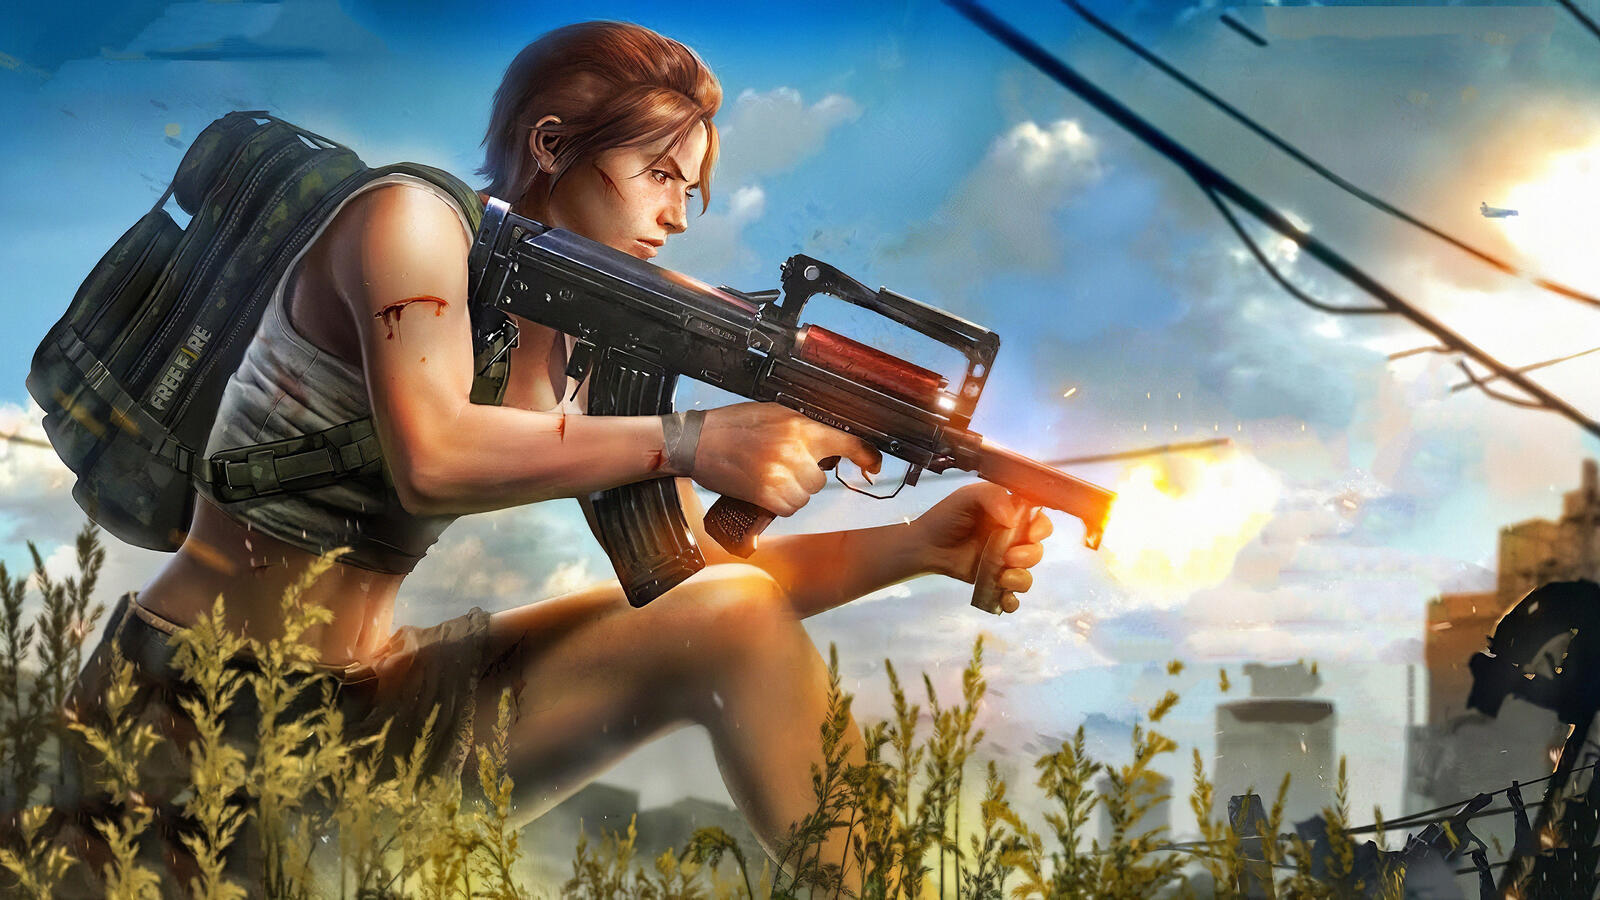 Wallpapers girl weapons games on the desktop